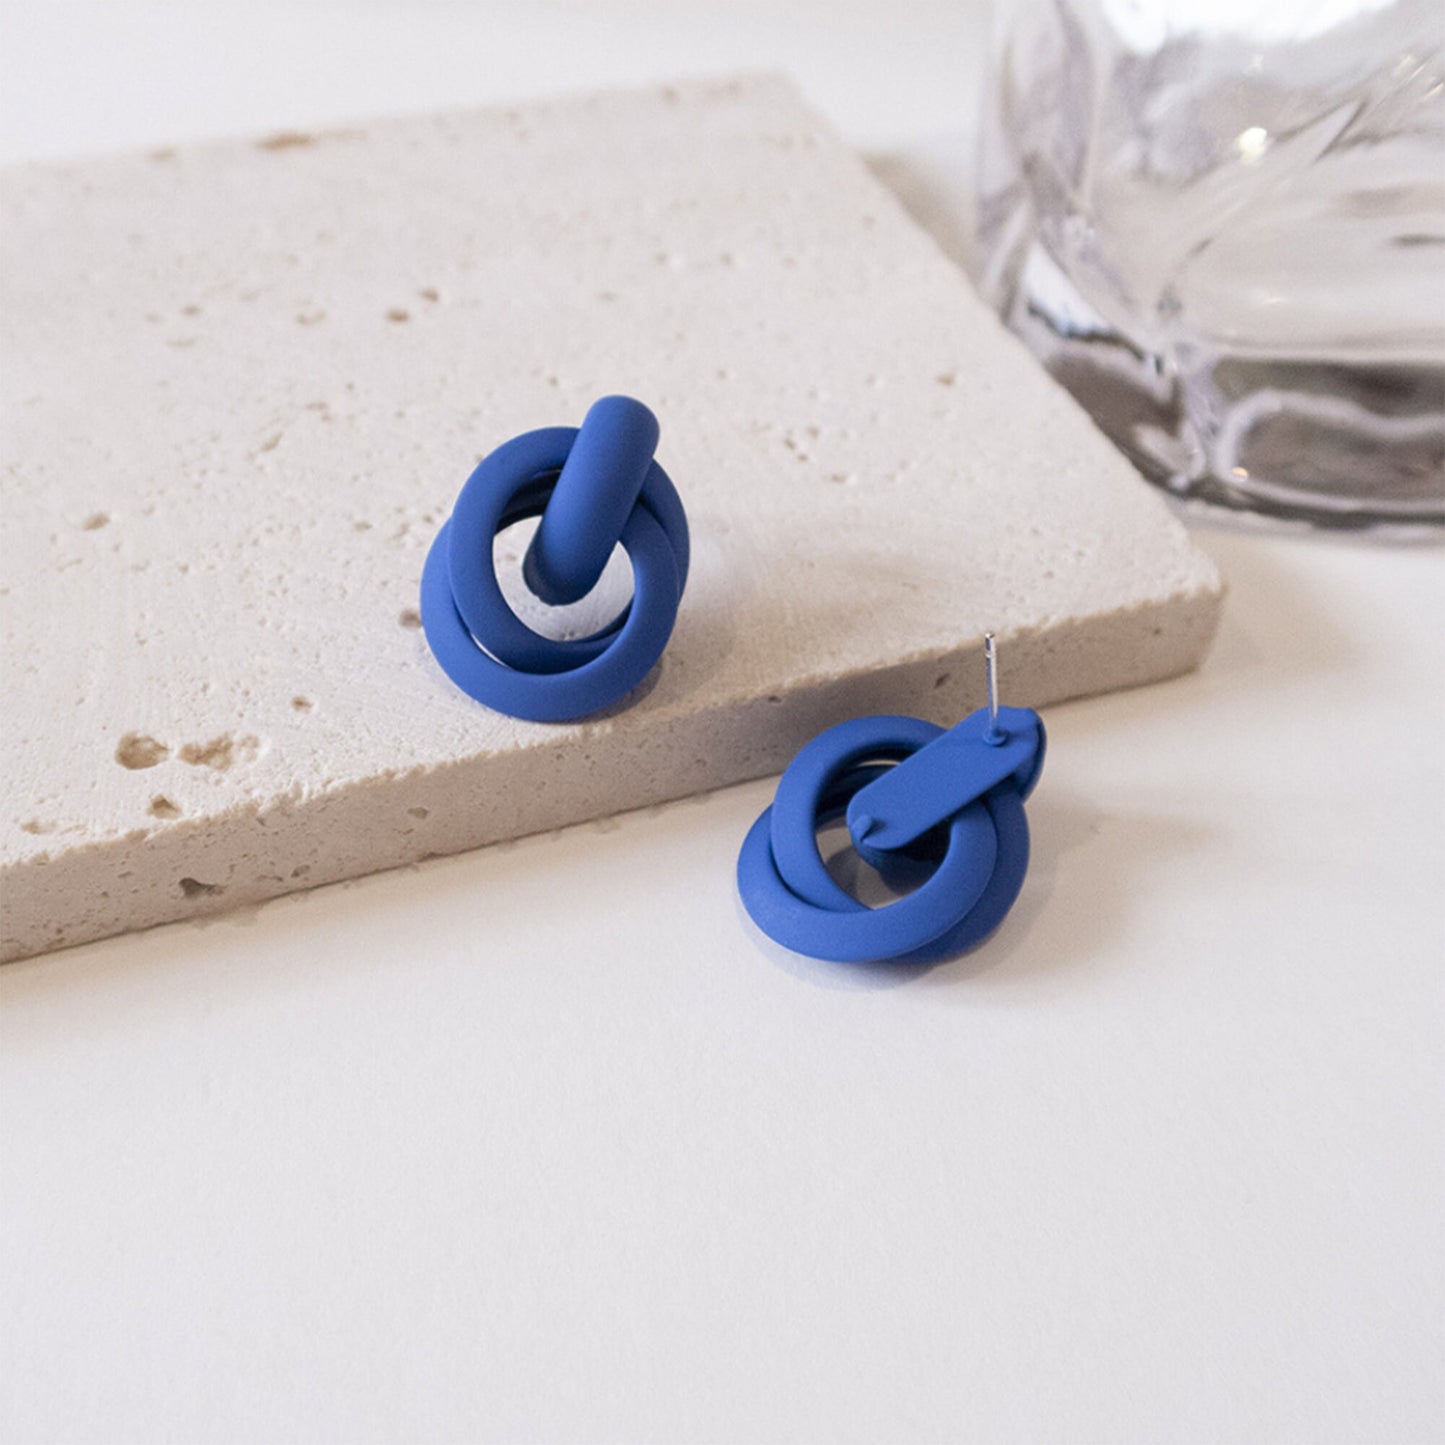 Blue 3D Loop Knots Large Stud Earrings Blue Ivory White Silver Posts Clay Statement Earrings Polymer Clay Earrings